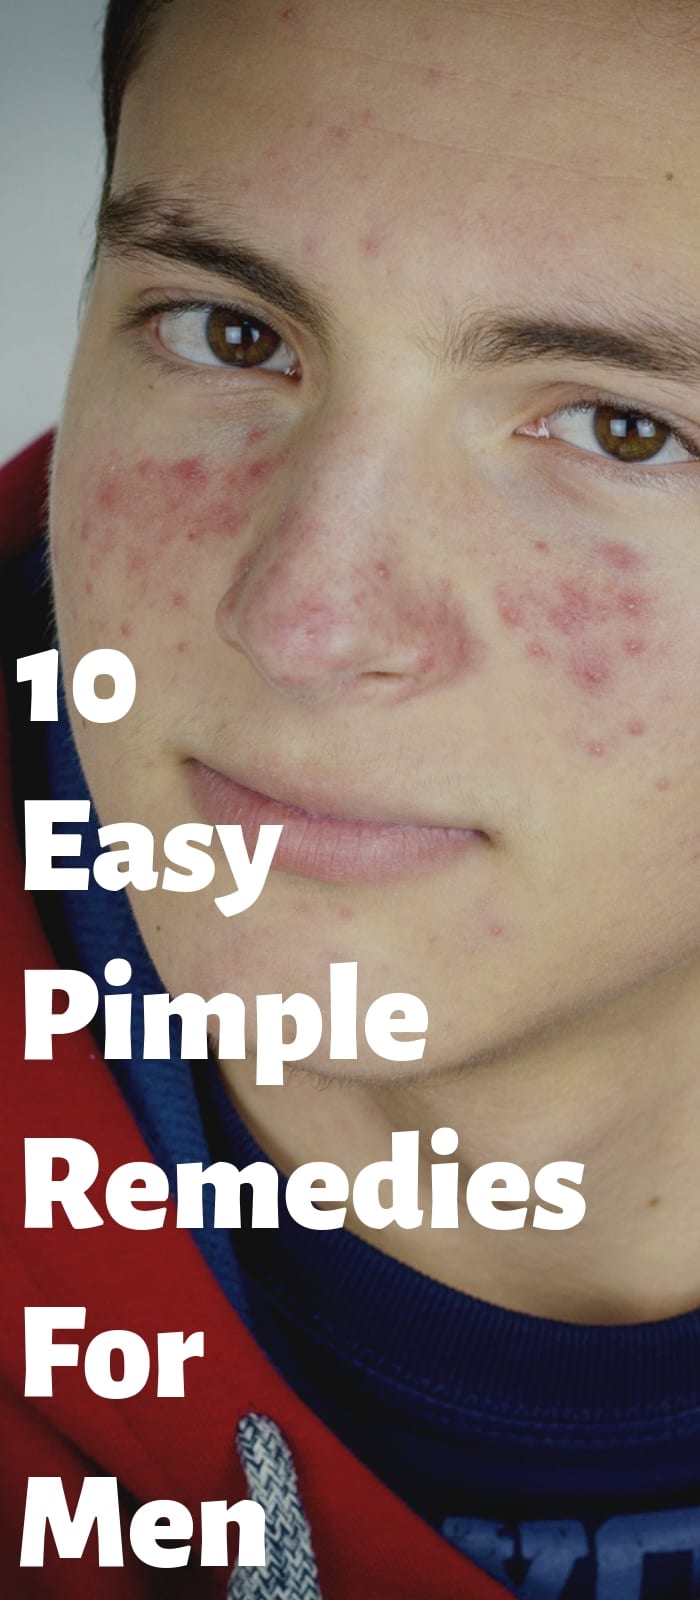 10 Easy Pimple Remedies For Men.